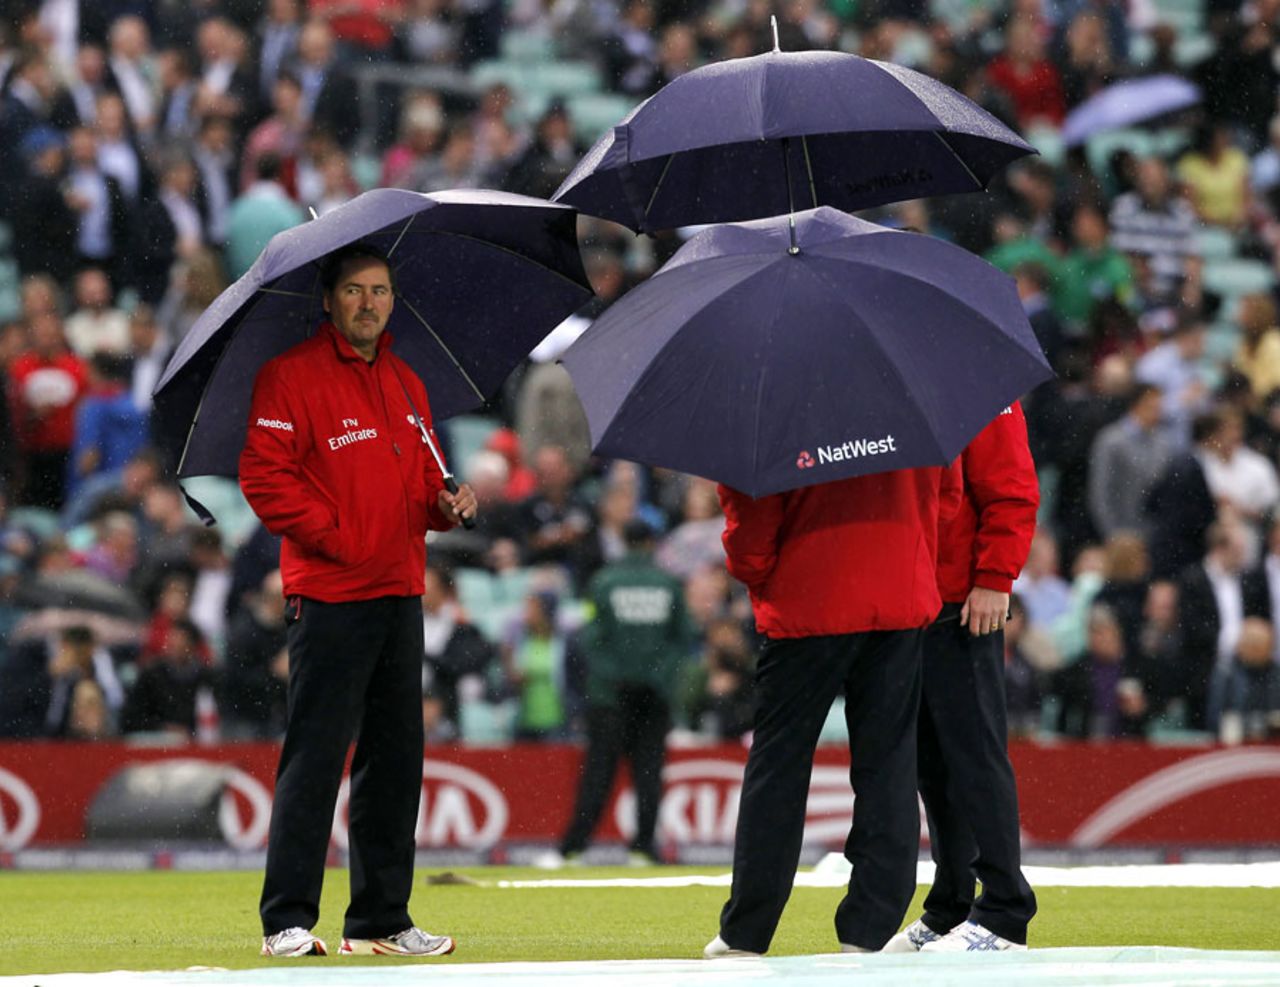 The umpires take cover from the rain, England v New Zealand, 2nd T20, The Oval, June 27, 2013